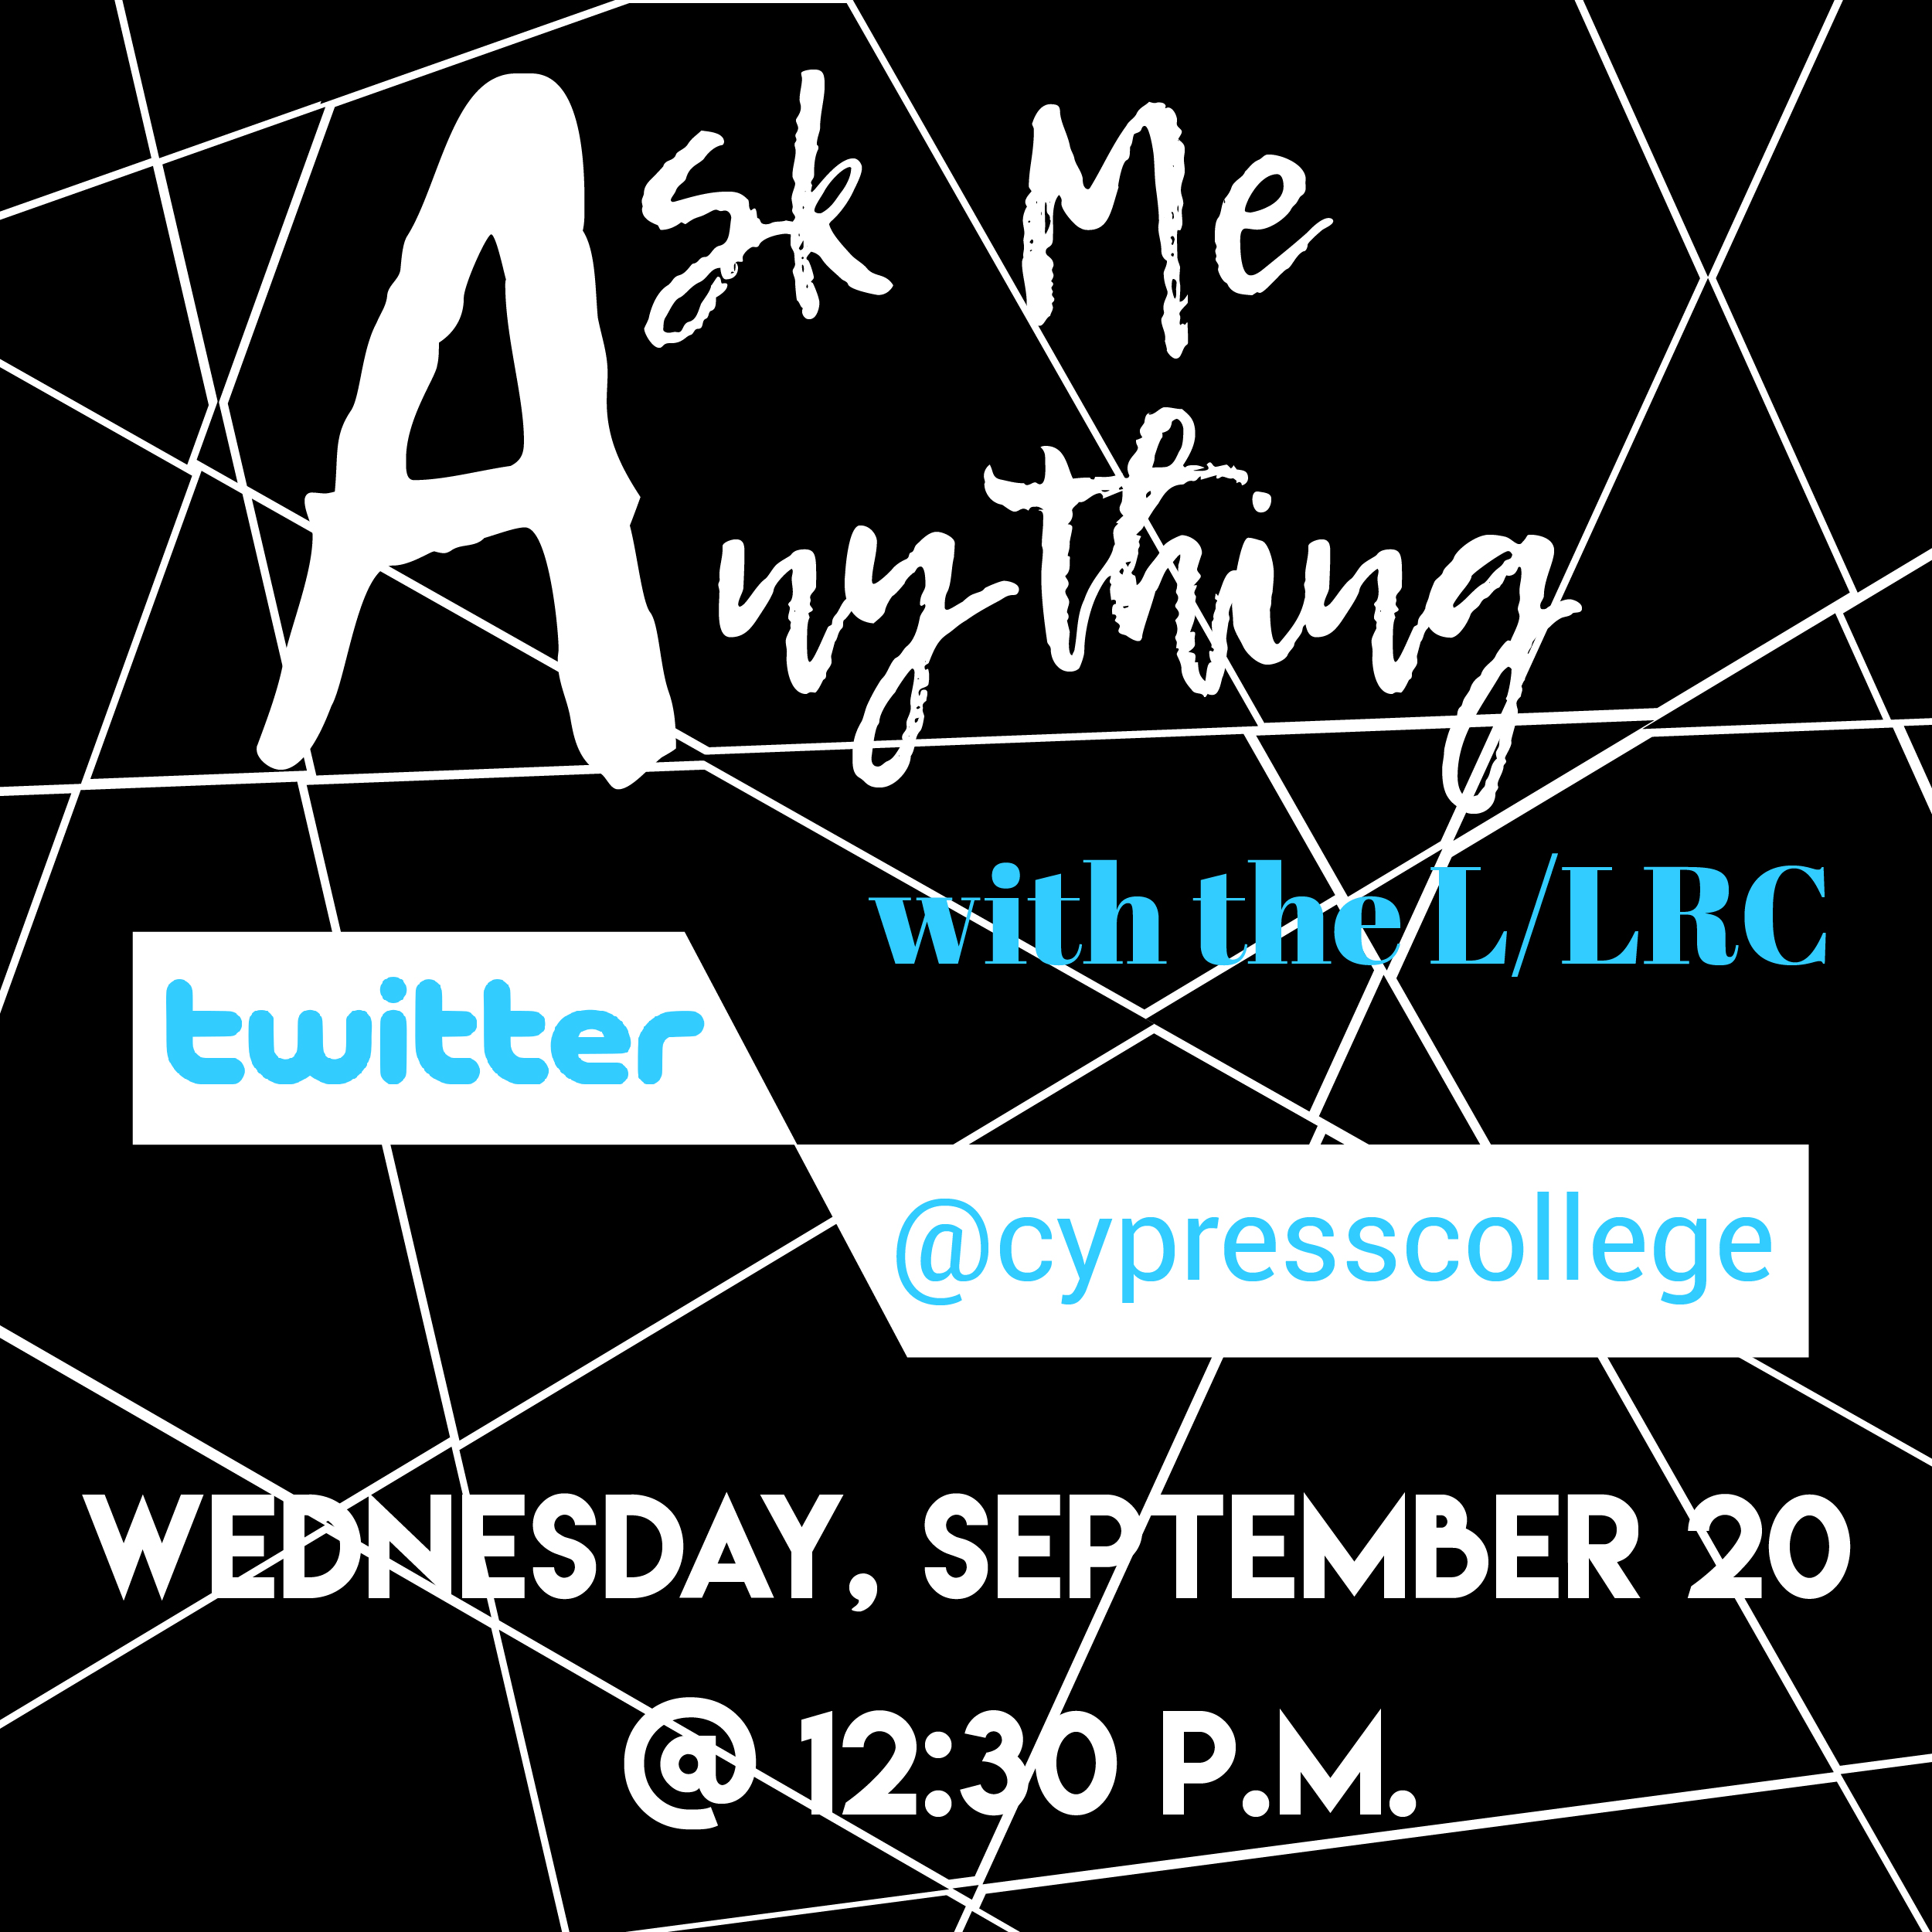 Ask Me Anything flyer